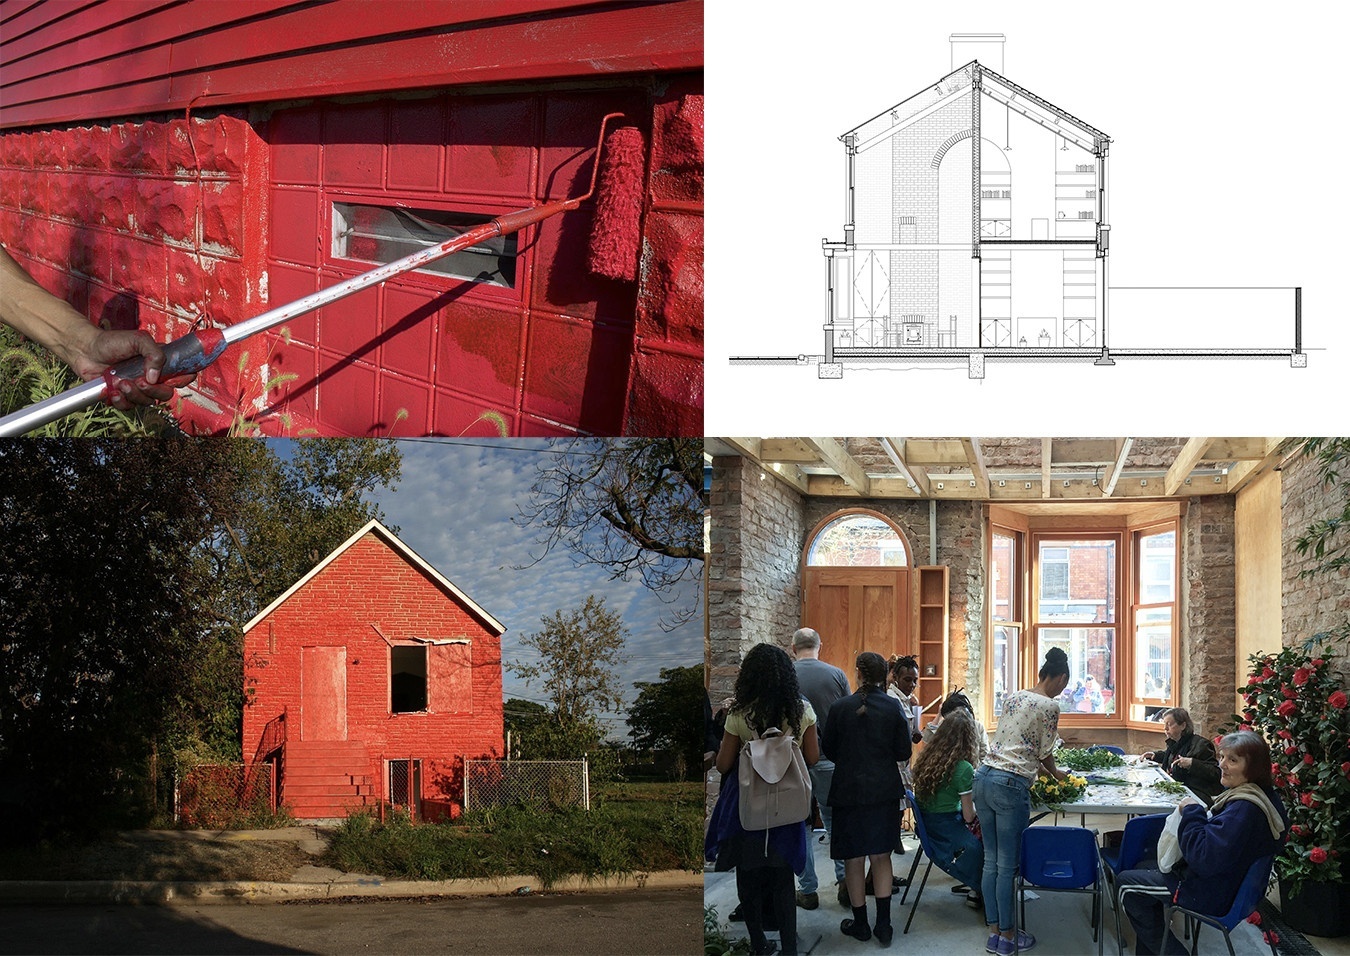 Four panel image of projects; top left is a detail photo of the side of a building being painted bright red; top right is a black-and-white elevation drawing of a two-story building; bottom right is a photo of numerous people gathered inside a building with brick walls and a bay window filling the space with light; bottom left is a photo of a bright red brick house with a metal fence in front and trees to the left.